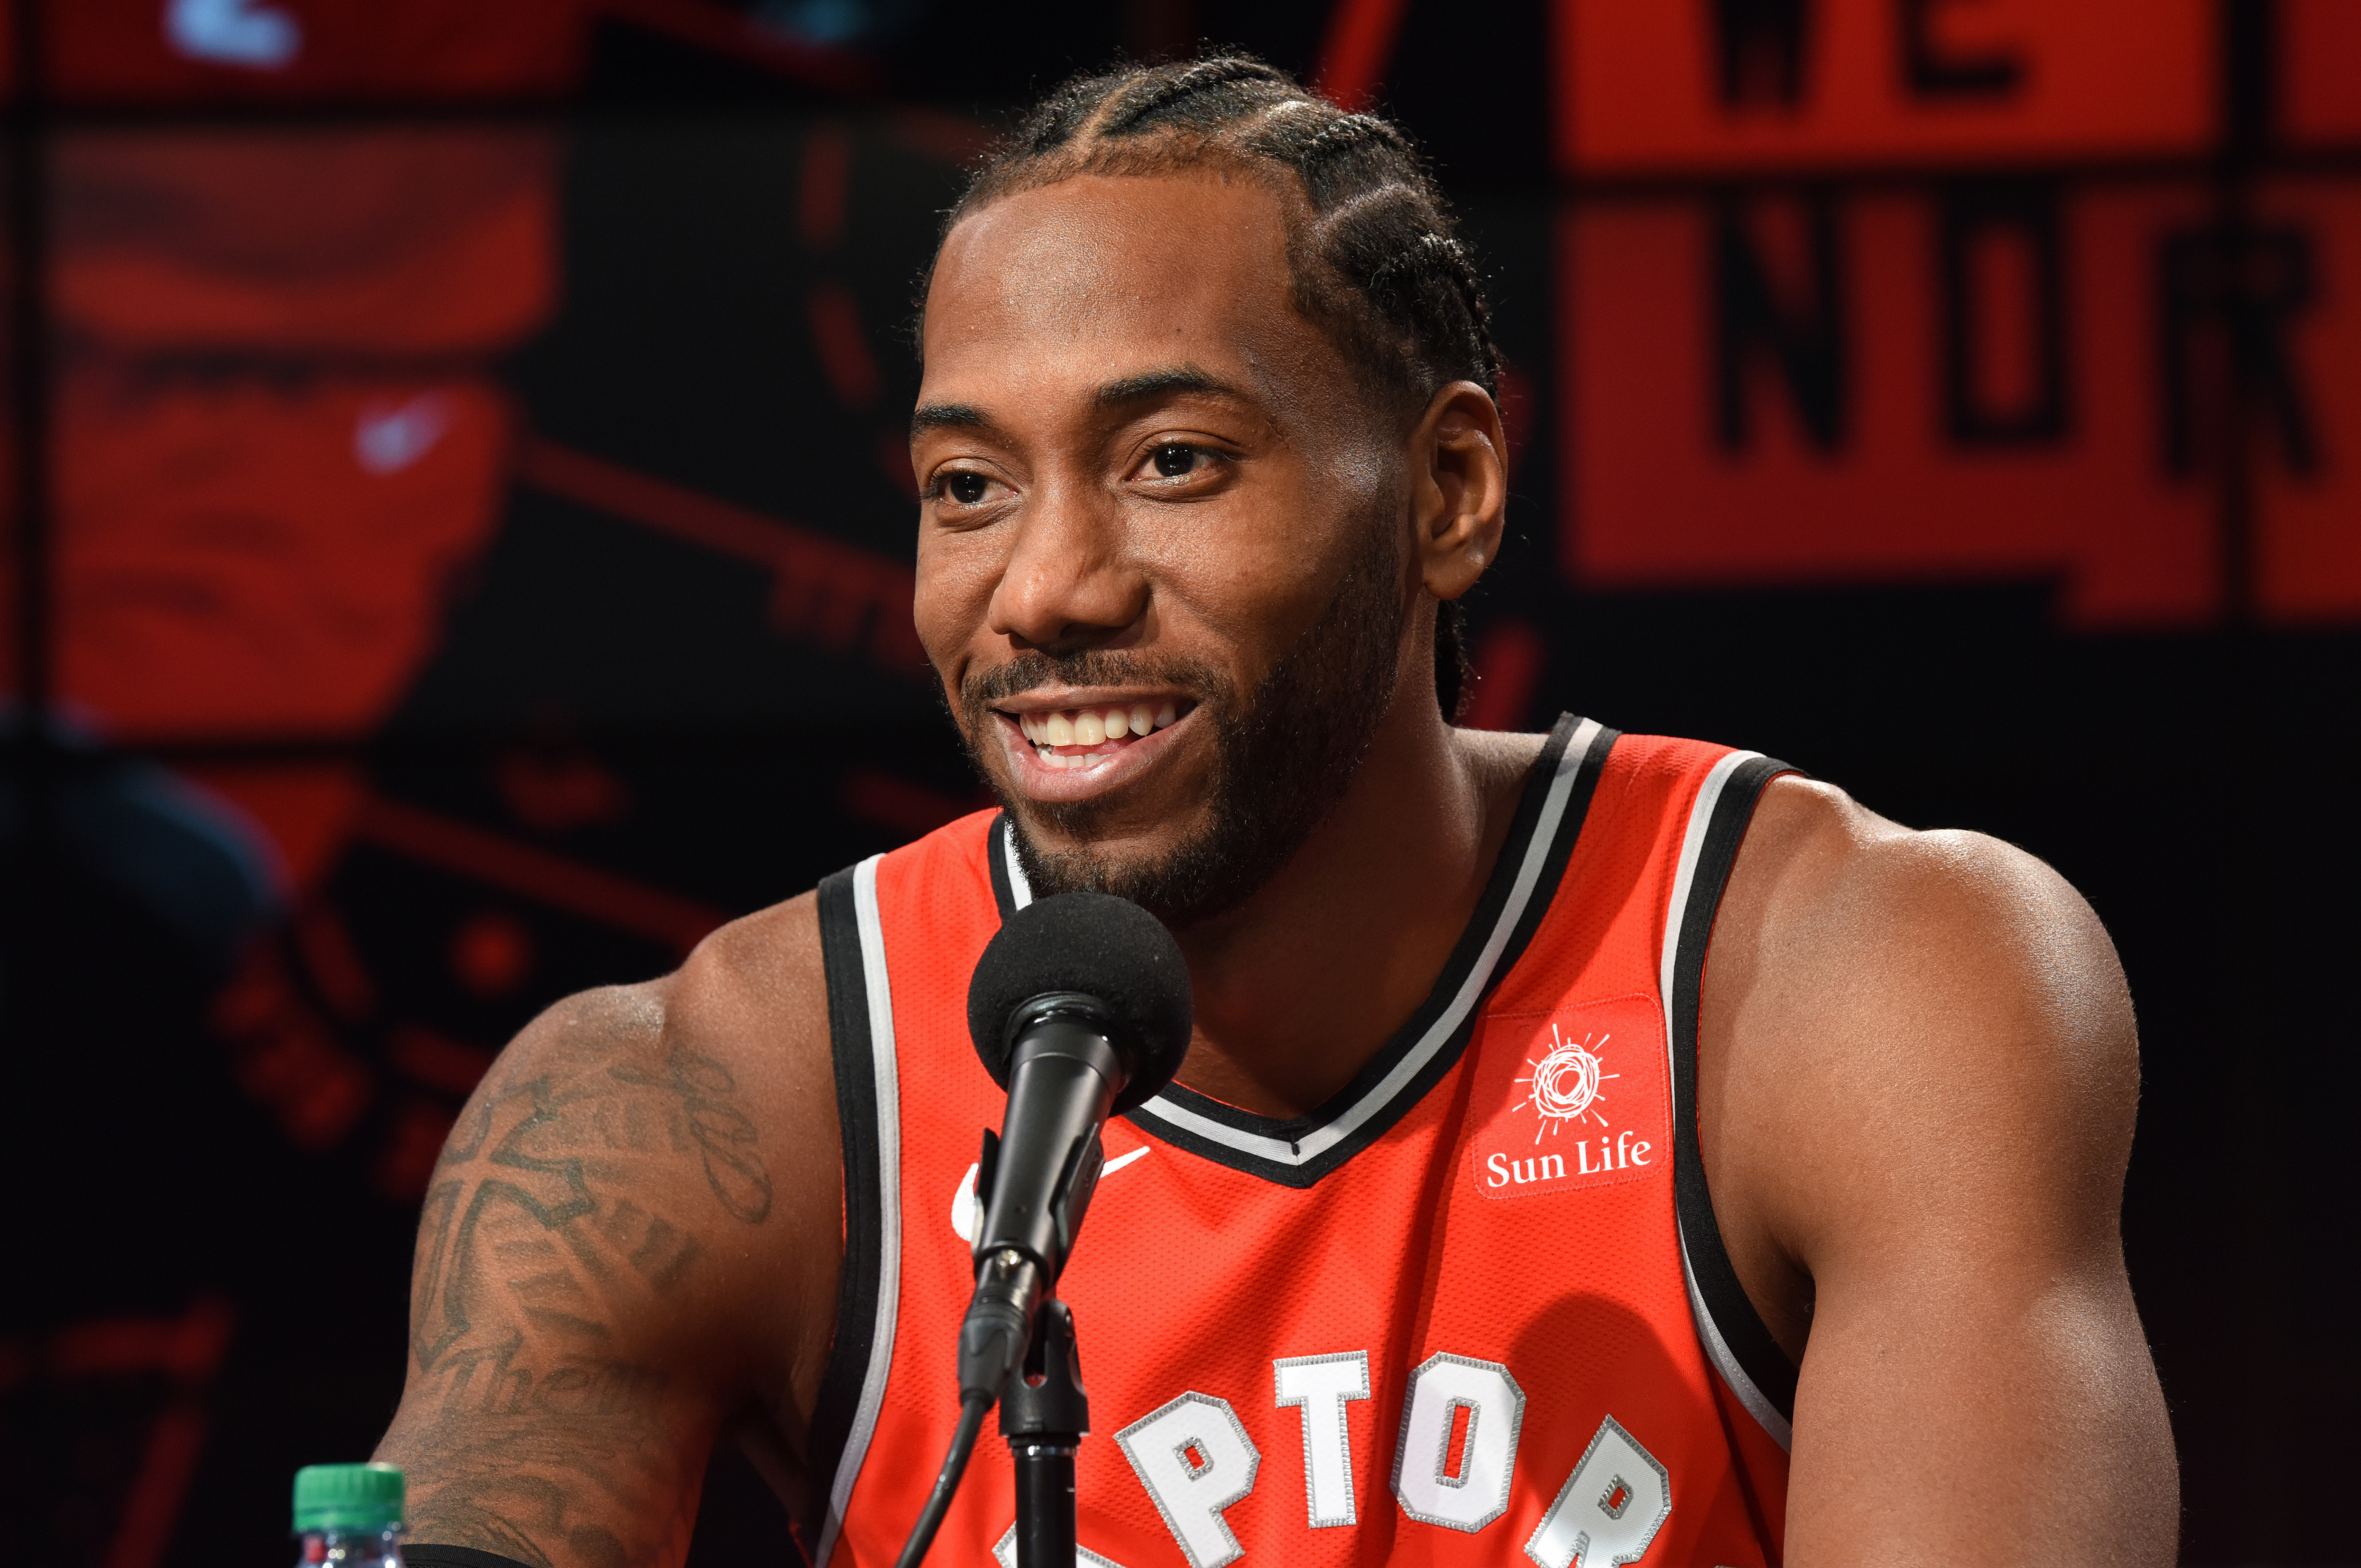 Kawhi Leonard 2021 Pictures and Photos - Getty Images